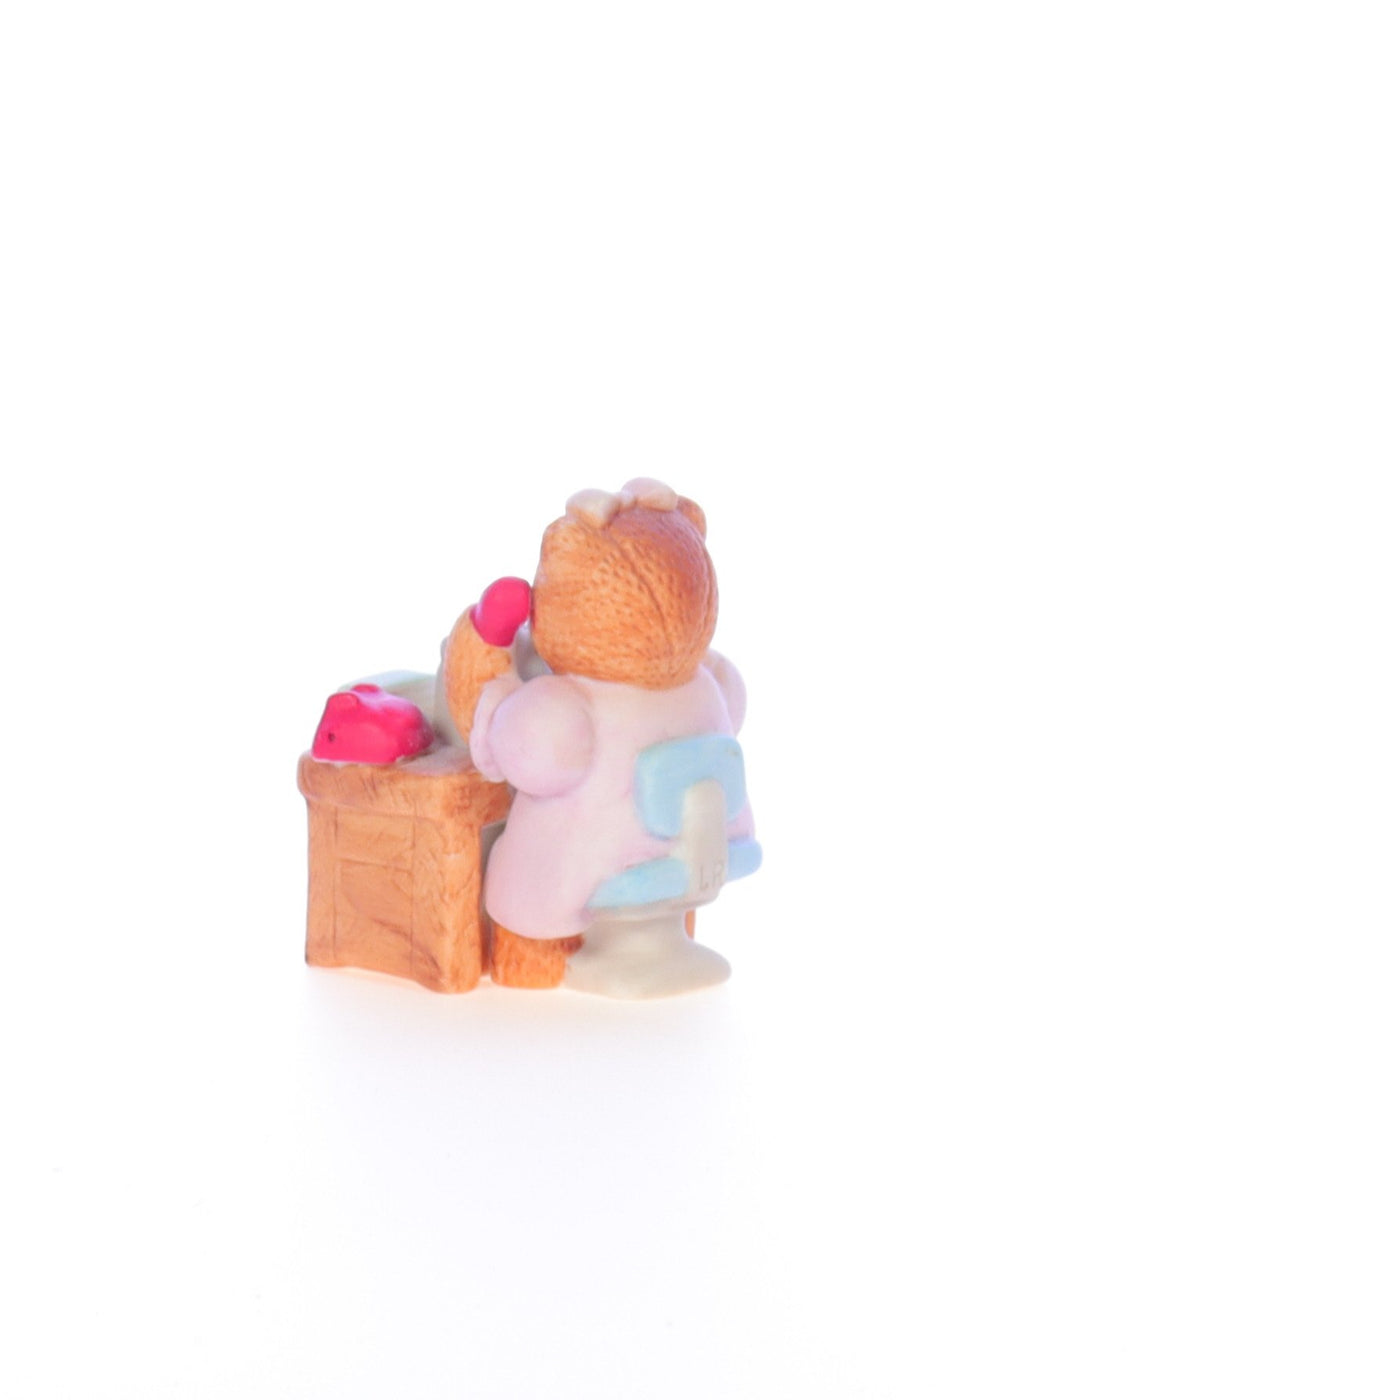 Lucy_And_Me_by_Lucy_Atwell_Porcelain_Figurine_Secretary_Bear_Lucy_Unknown_057_04